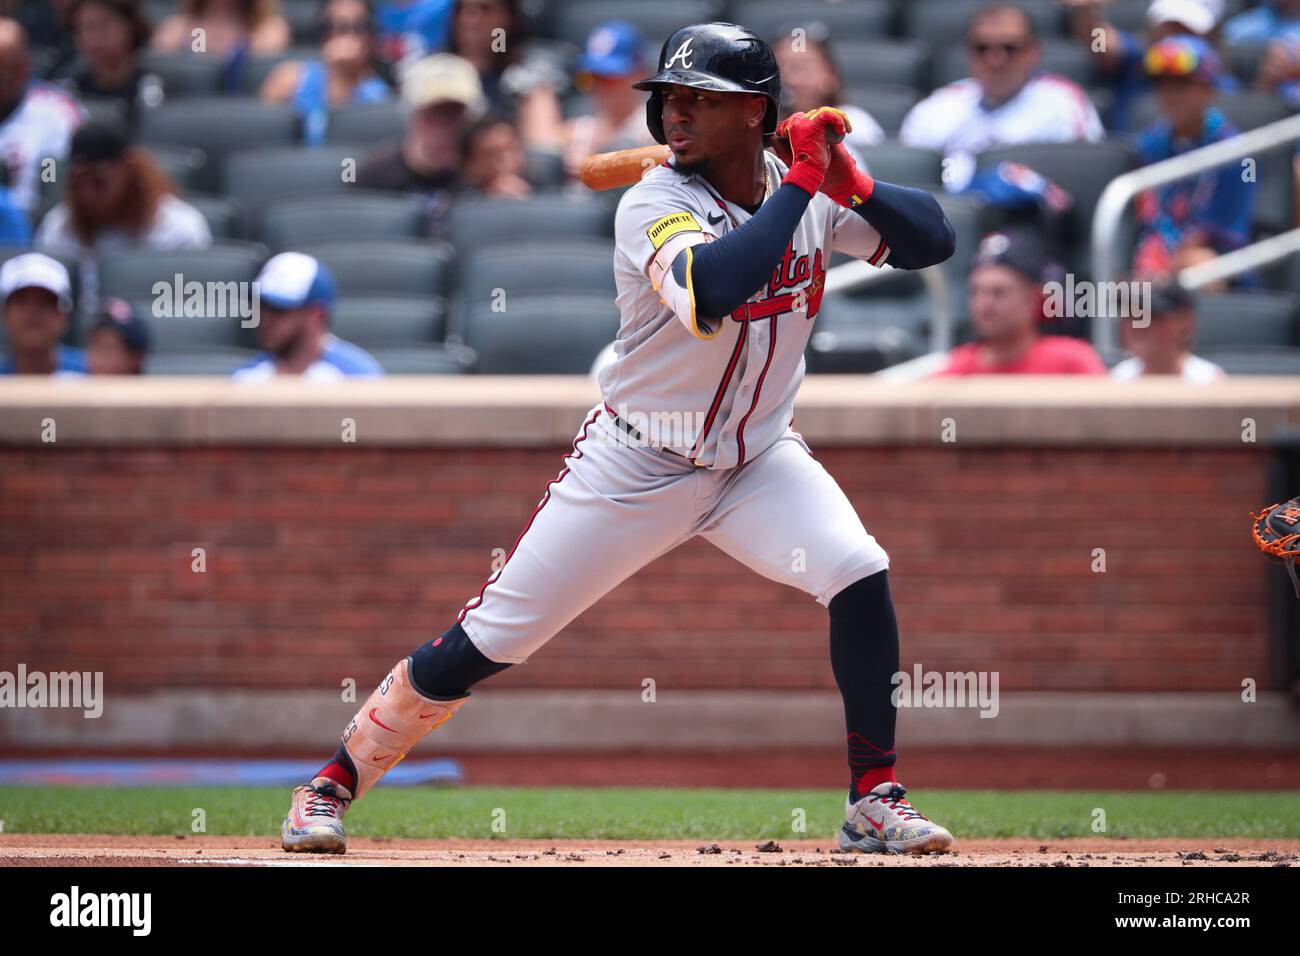 New York, United States. 12th Aug, 2023. Aug 12 2023; New York City, New  York, Atlanta Braves second baseman Ozzie Albies (1) in the batter box  against the New York Mets. (Ariel